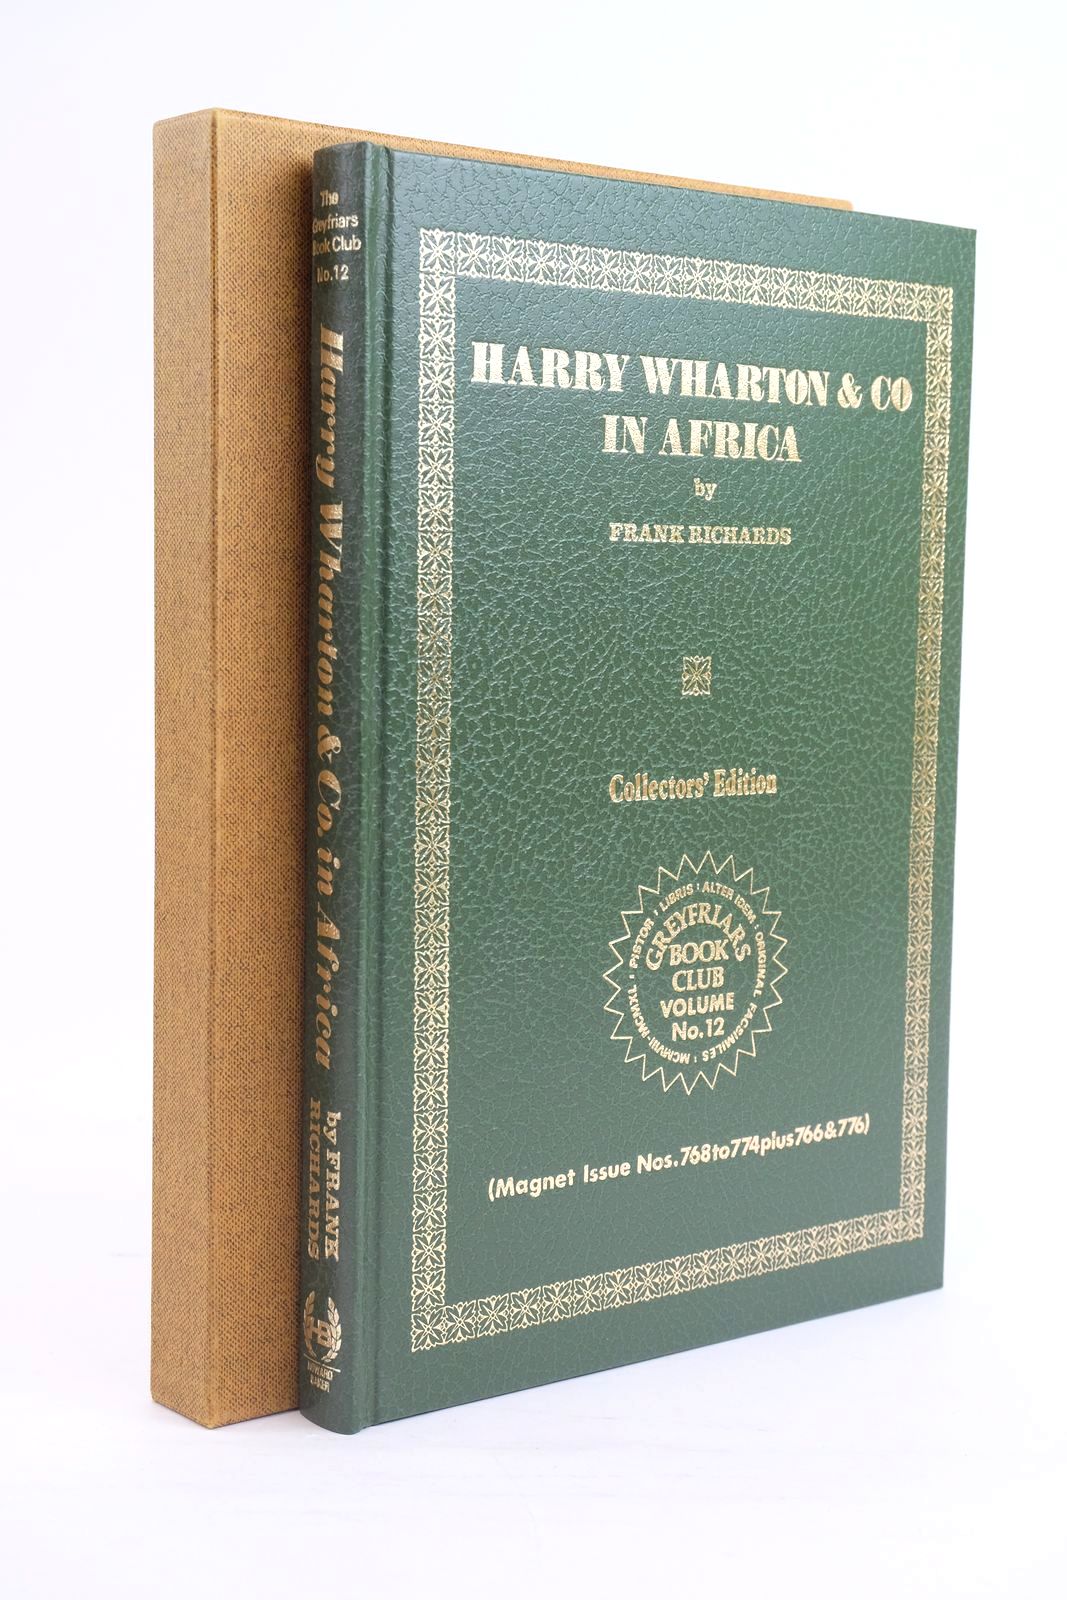 Photo of HARRY WHARTON & CO IN AFRICA written by Richards, Frank published by Howard Baker Press (STOCK CODE: 1319976)  for sale by Stella & Rose's Books